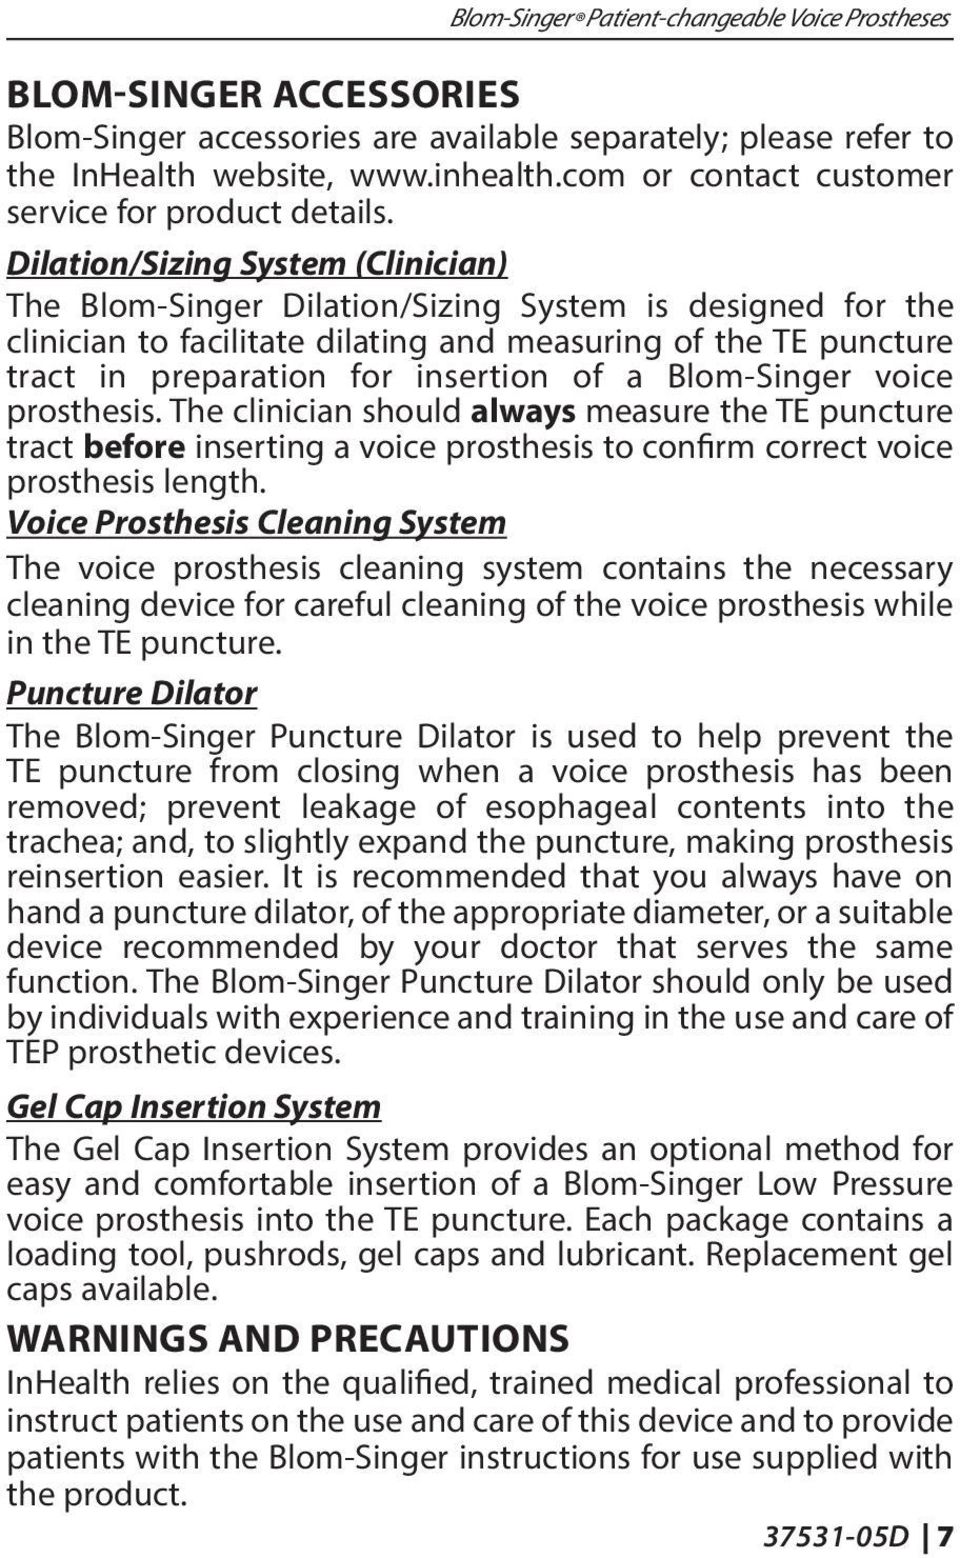 Dilation/Sizing System (Clinician) The Blom-Singer Dilation/Sizing System is designed for the clinician to facilitate dilating and measuring of the TE puncture tract in preparation for insertion of a